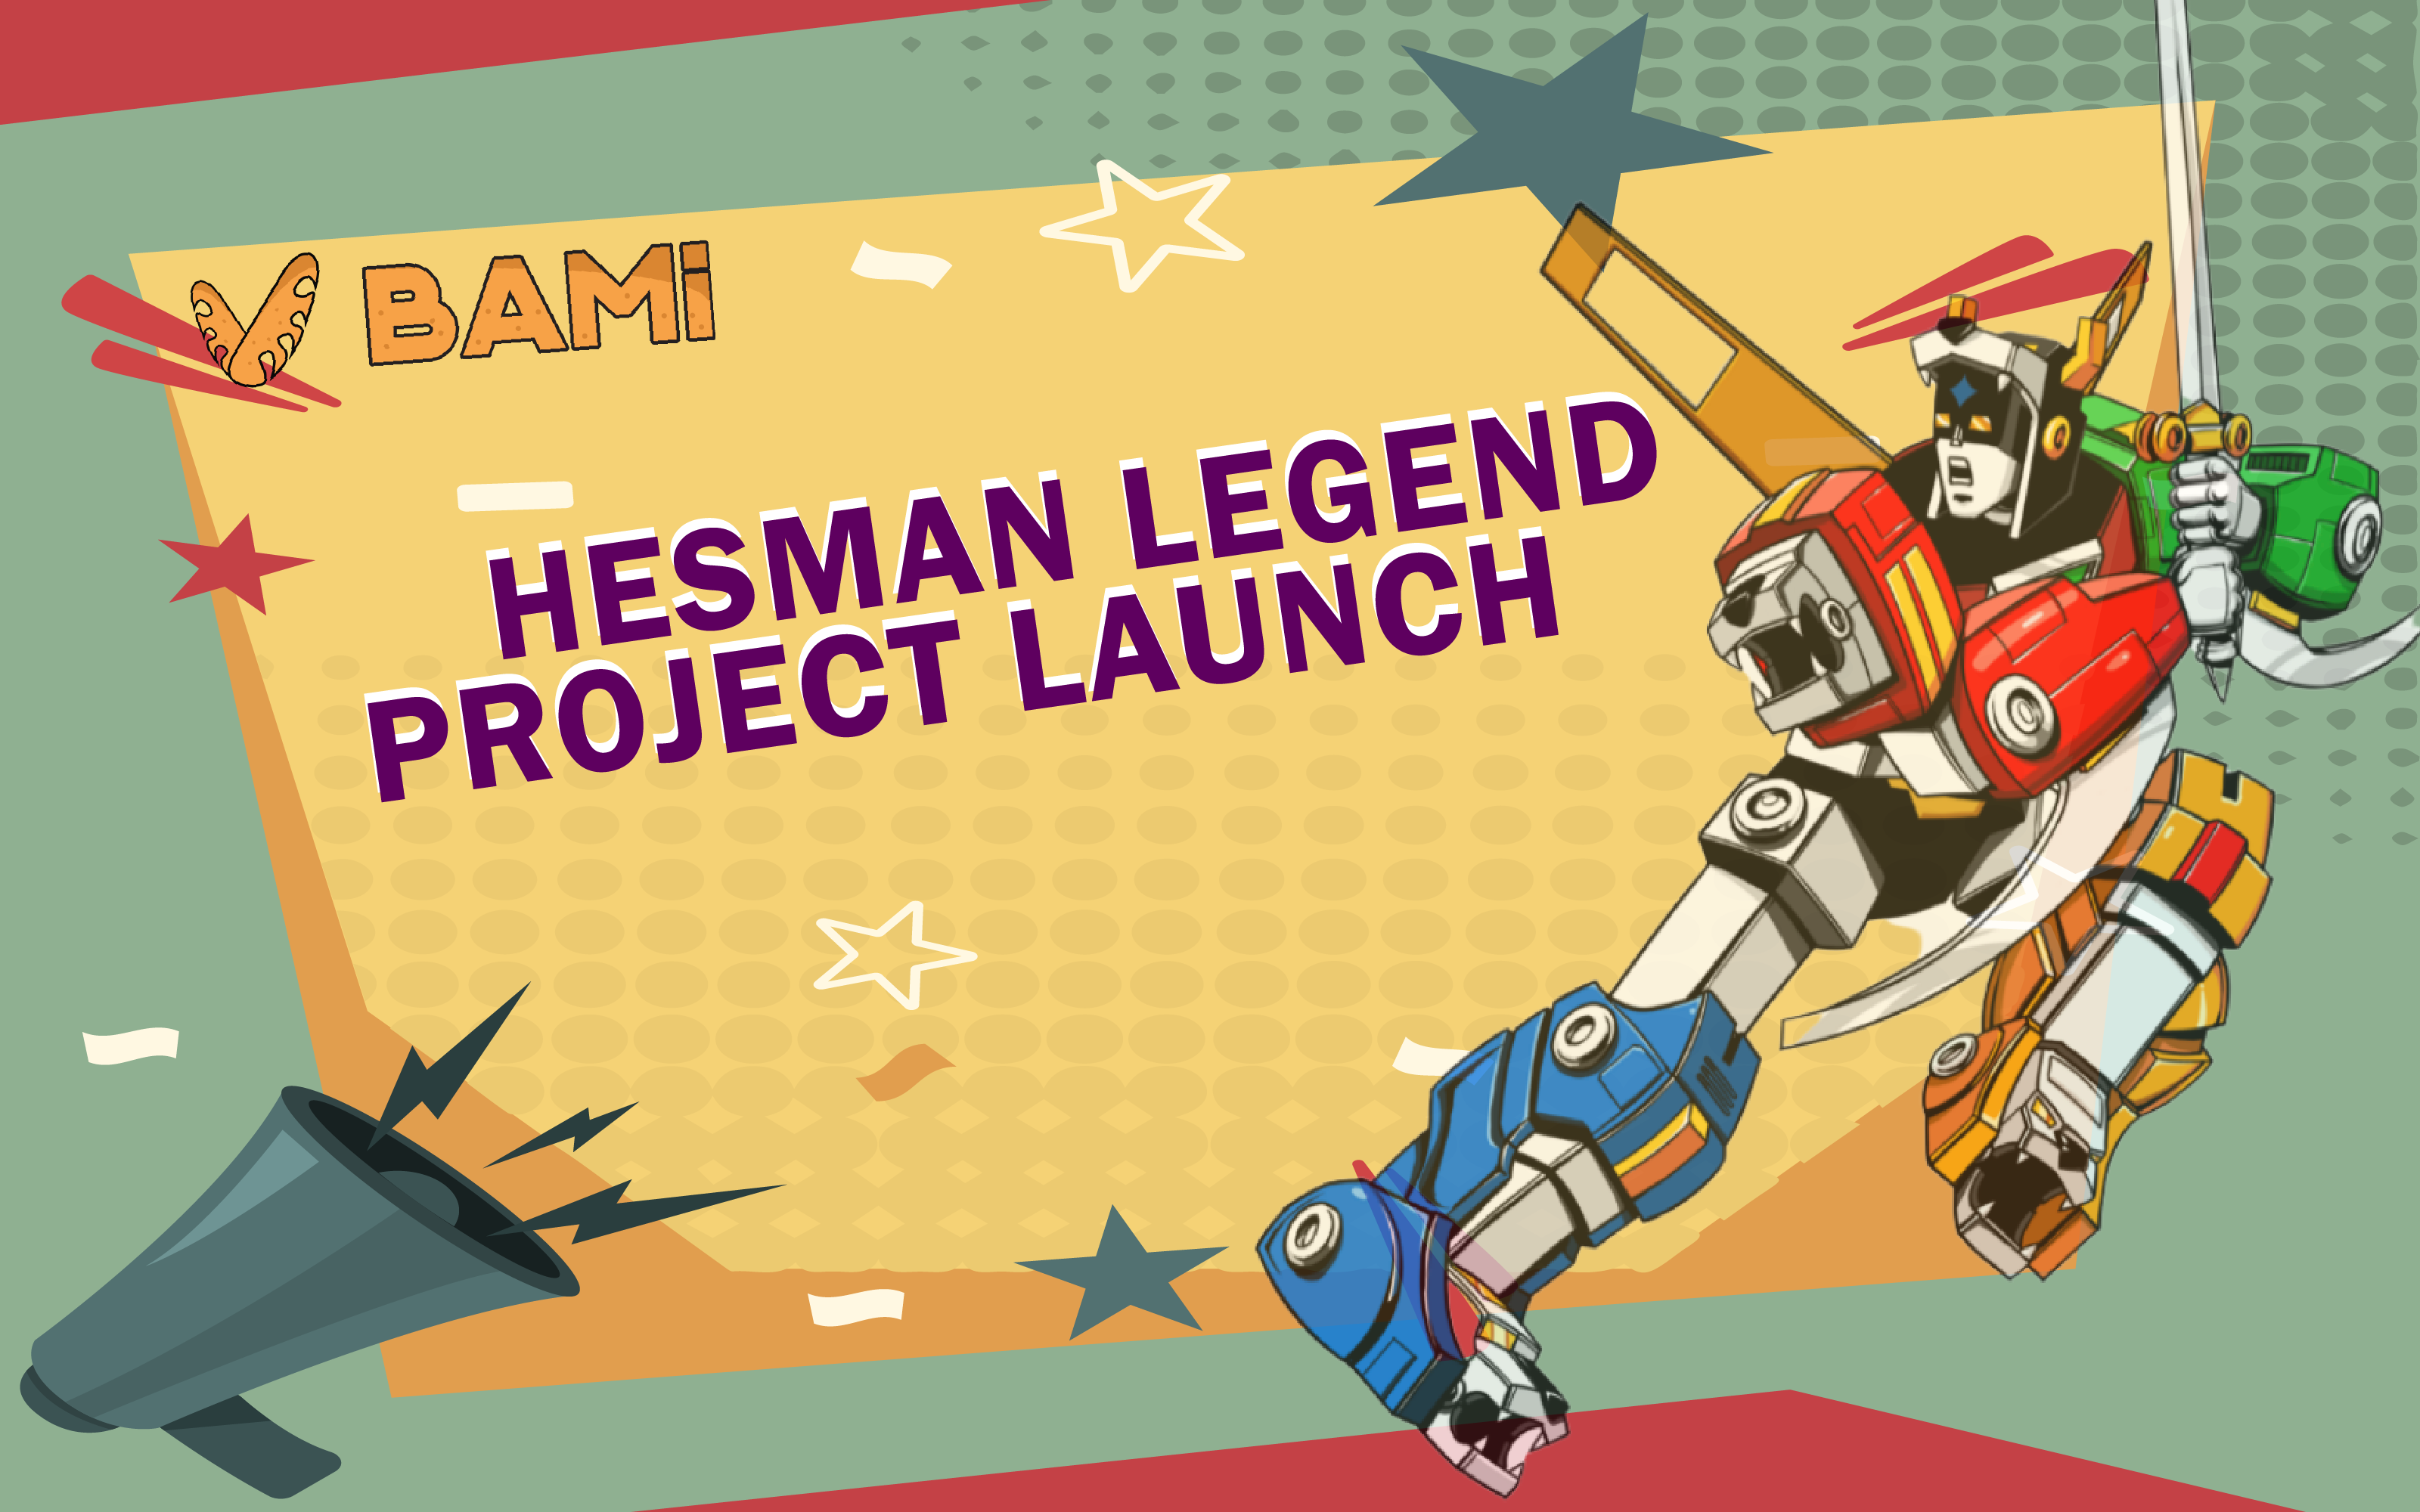 Bami Pawn Shop Attended The Hesman Legend Project Launch